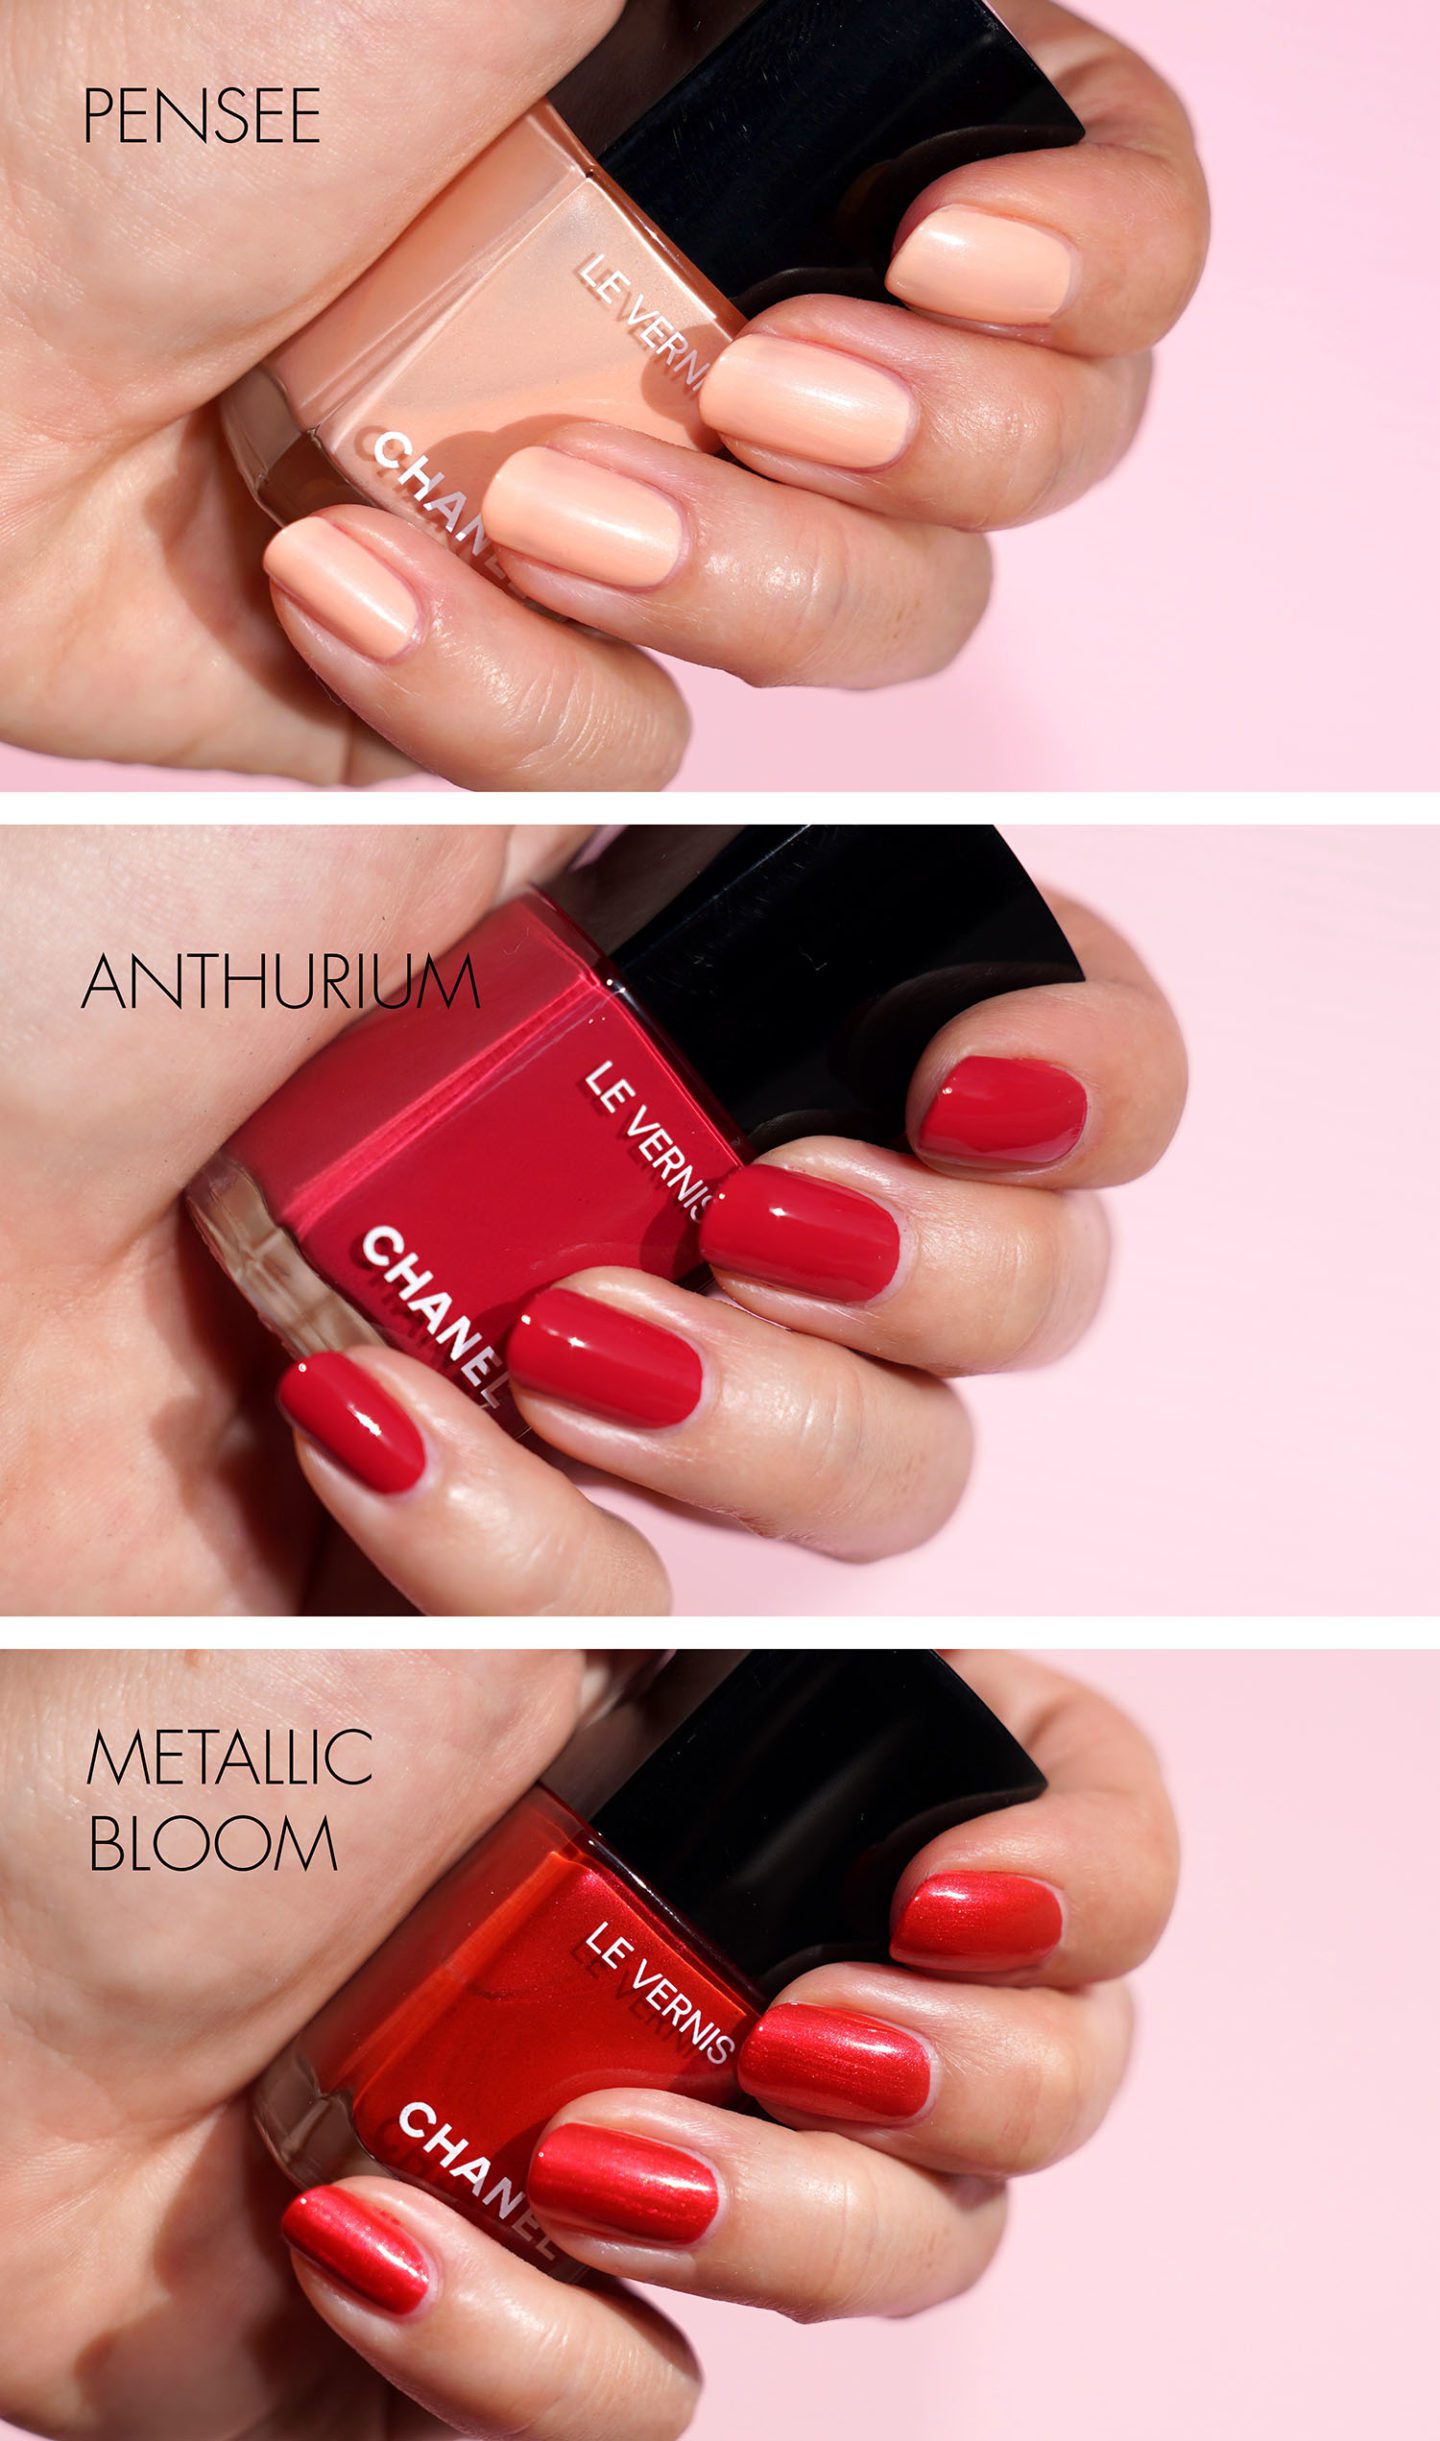 Chanel Le Vernis in 883 Pensee, 885 Anthurium and 887 Metallic Bloom